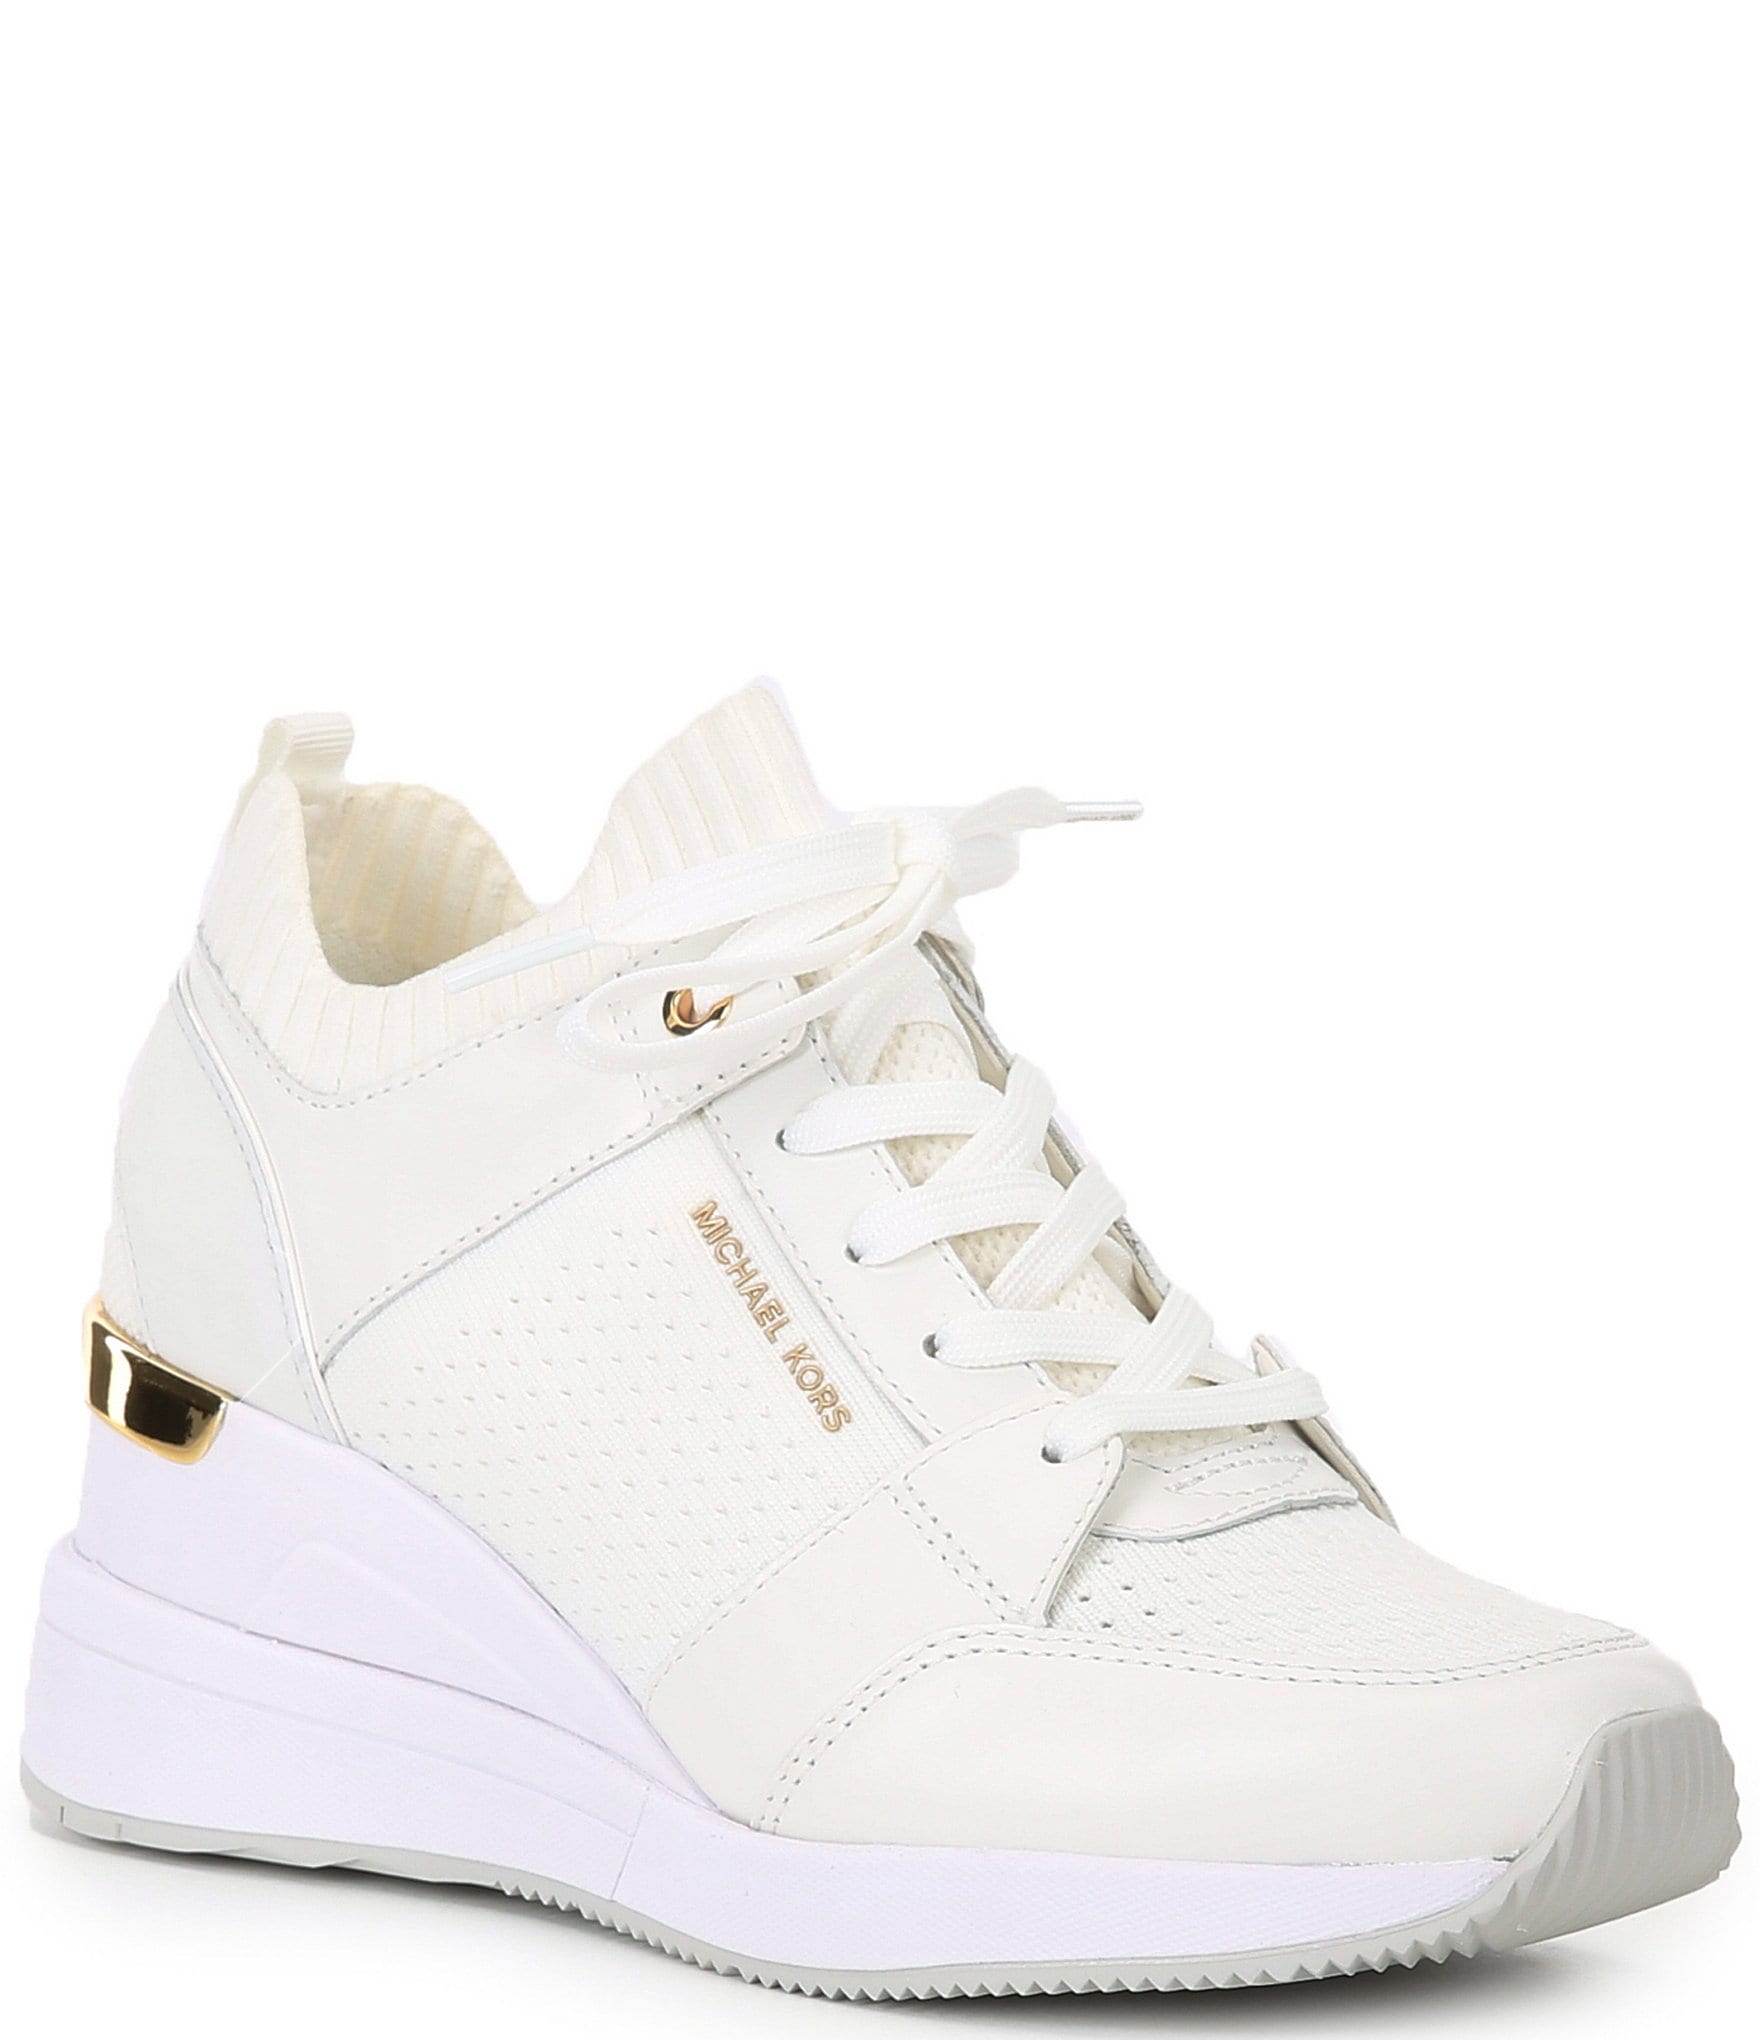 Sneakers / Trainer from Michael Kors for Women in White| Stylight